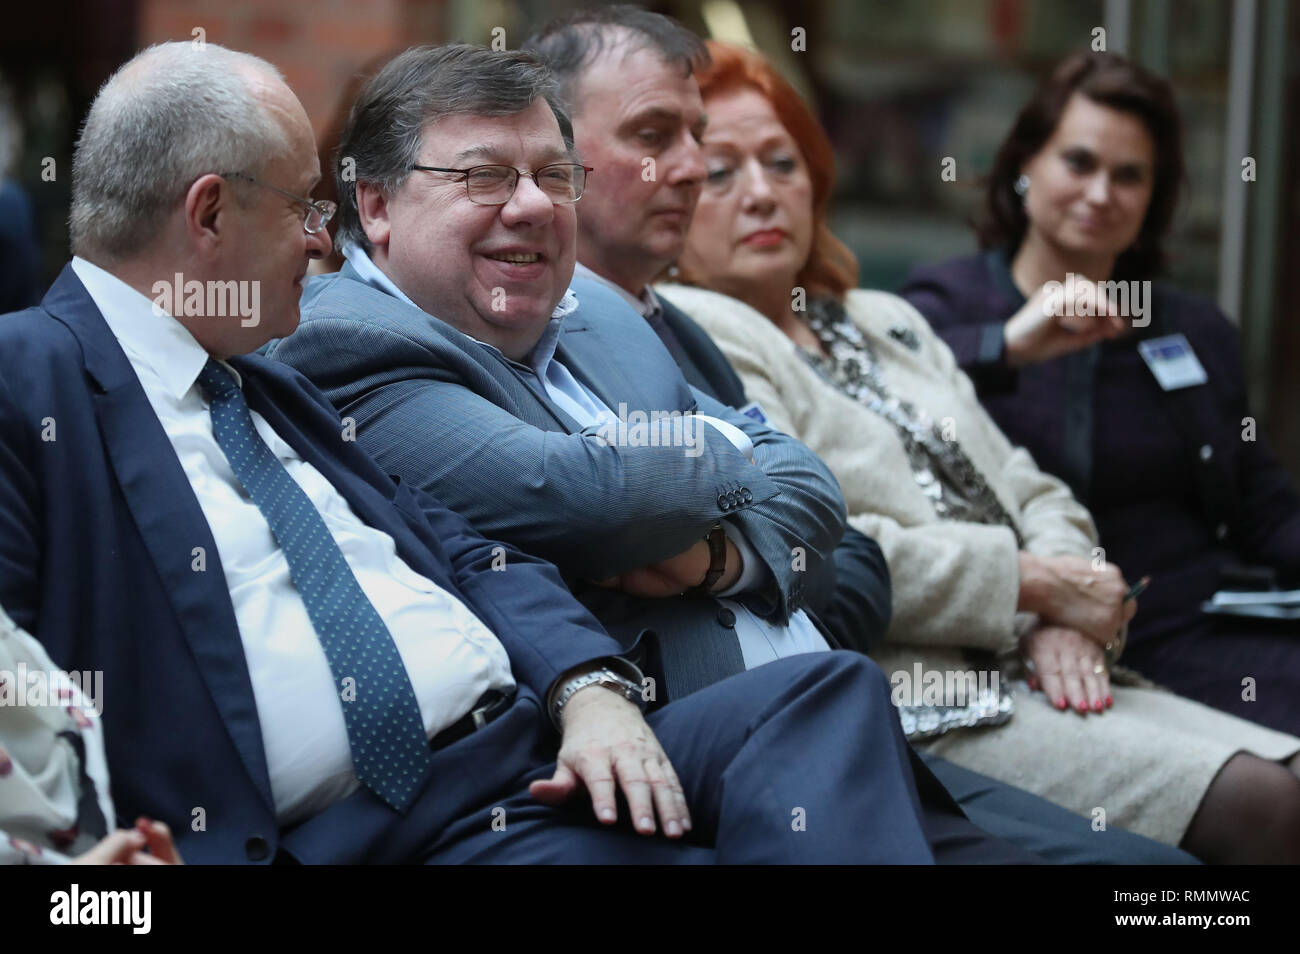 Former Taoiseach Brian Cowen (2nd left) at The European Economic and Social Committee conference at Queen's University in Belfast. Stock Photo